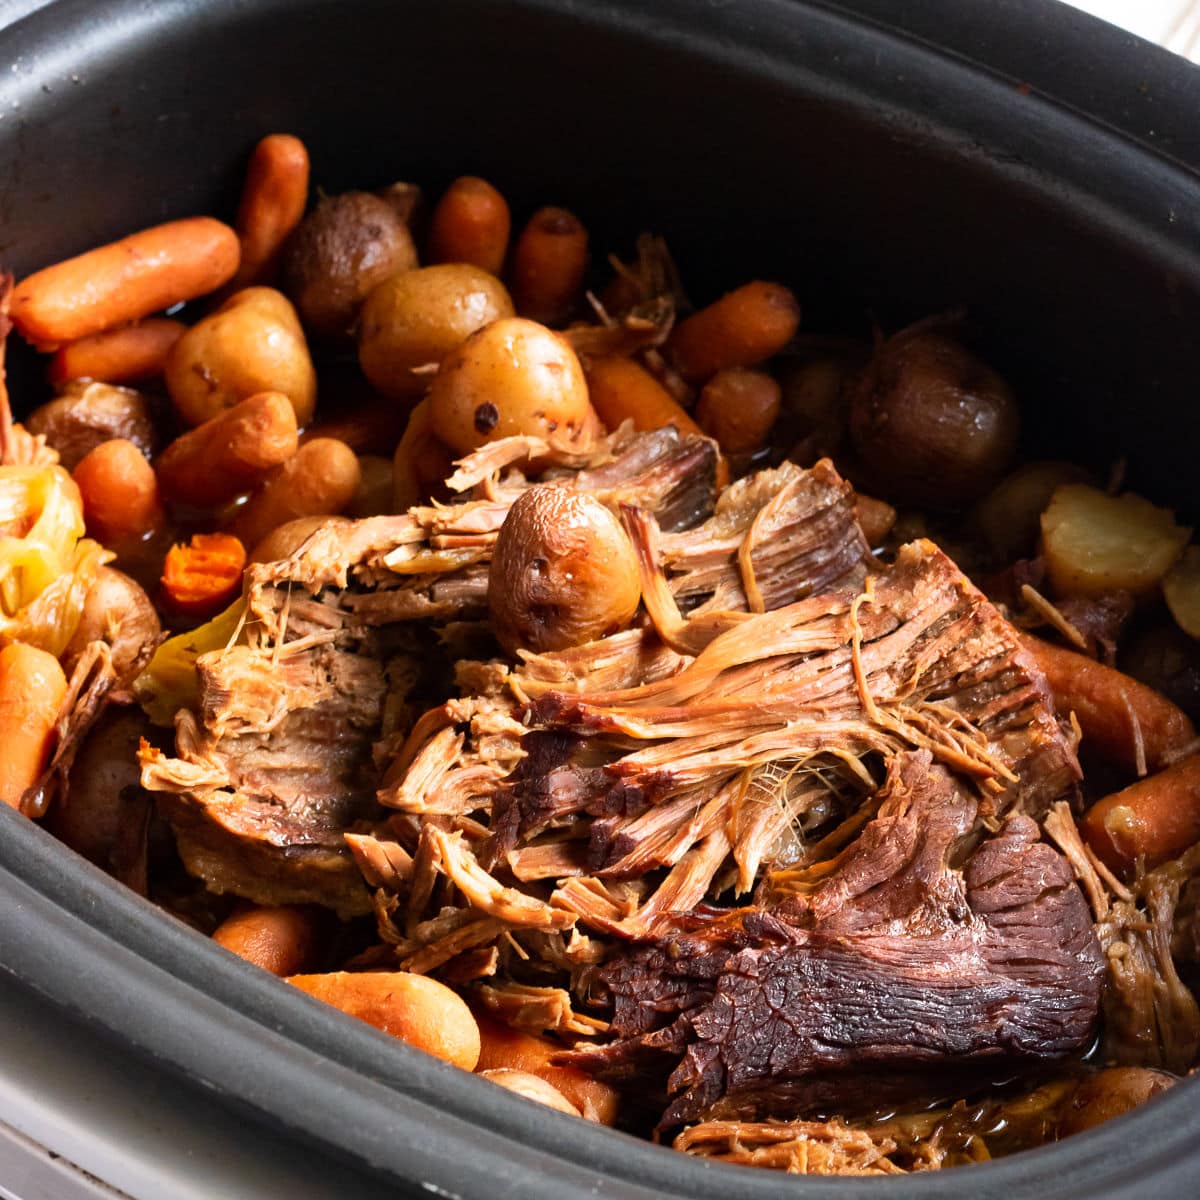 Is a Multi Cooker Better than a Slow Cooker? - Restless Chipotle